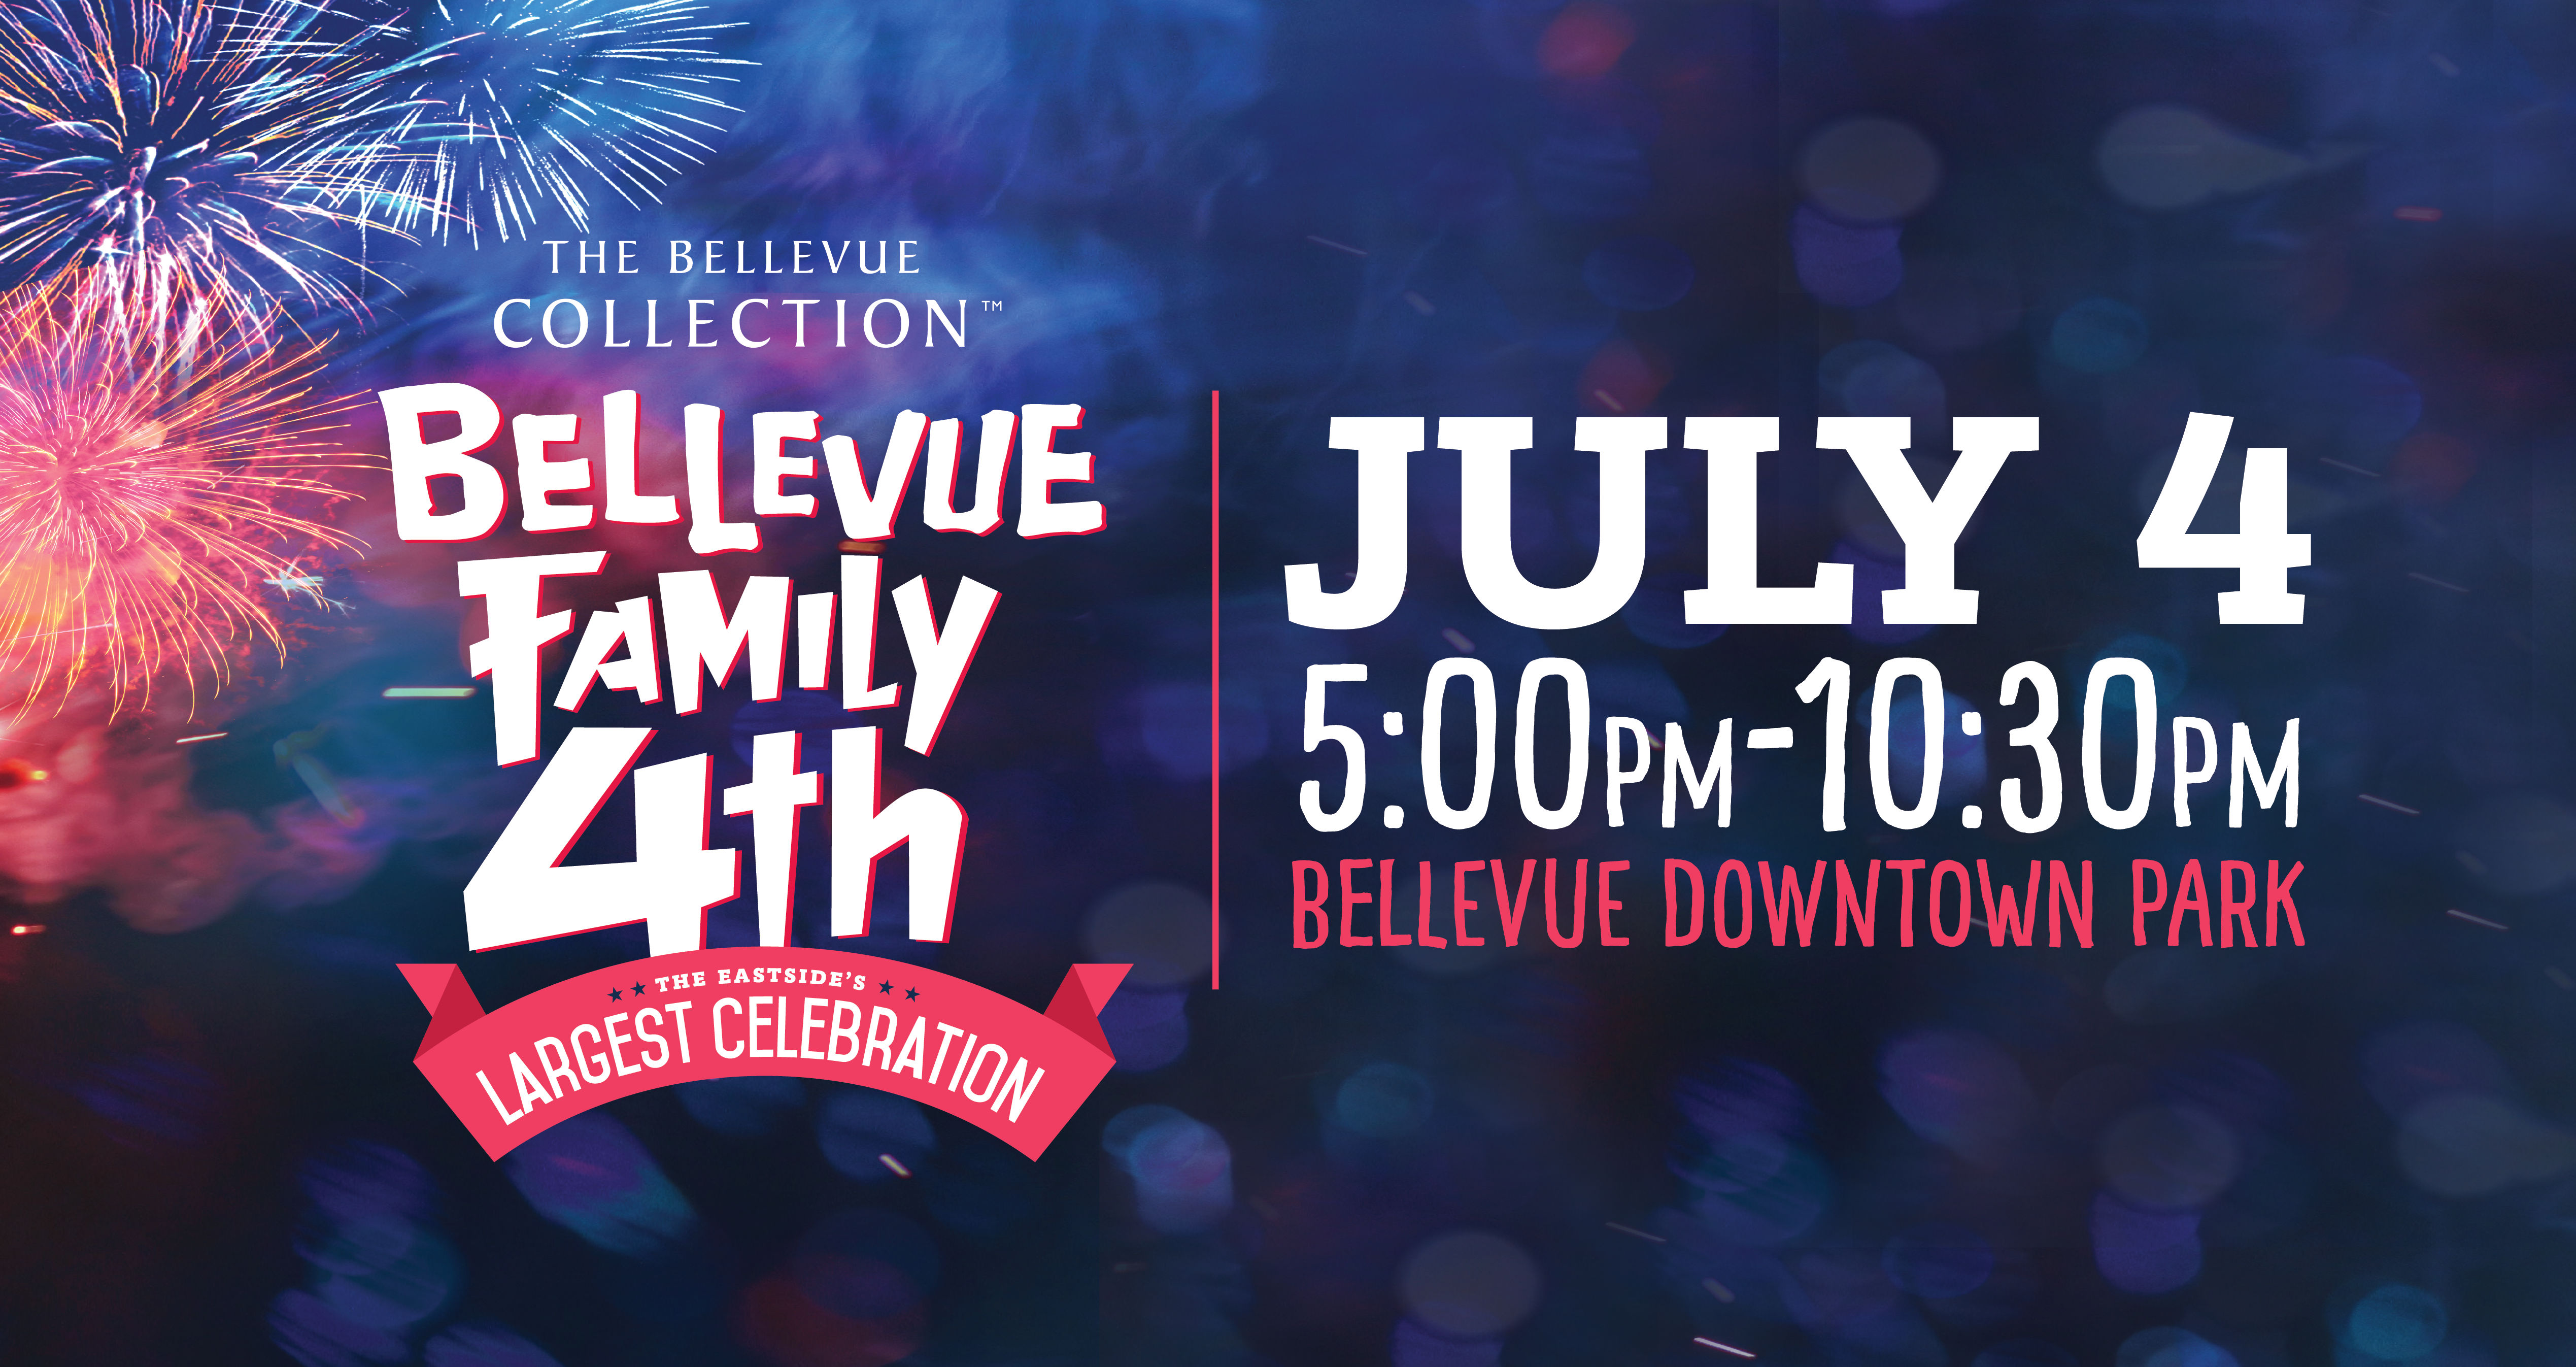 Bellevue Family 4th Celebrates 30 Years of Patriotic Summer Fun and